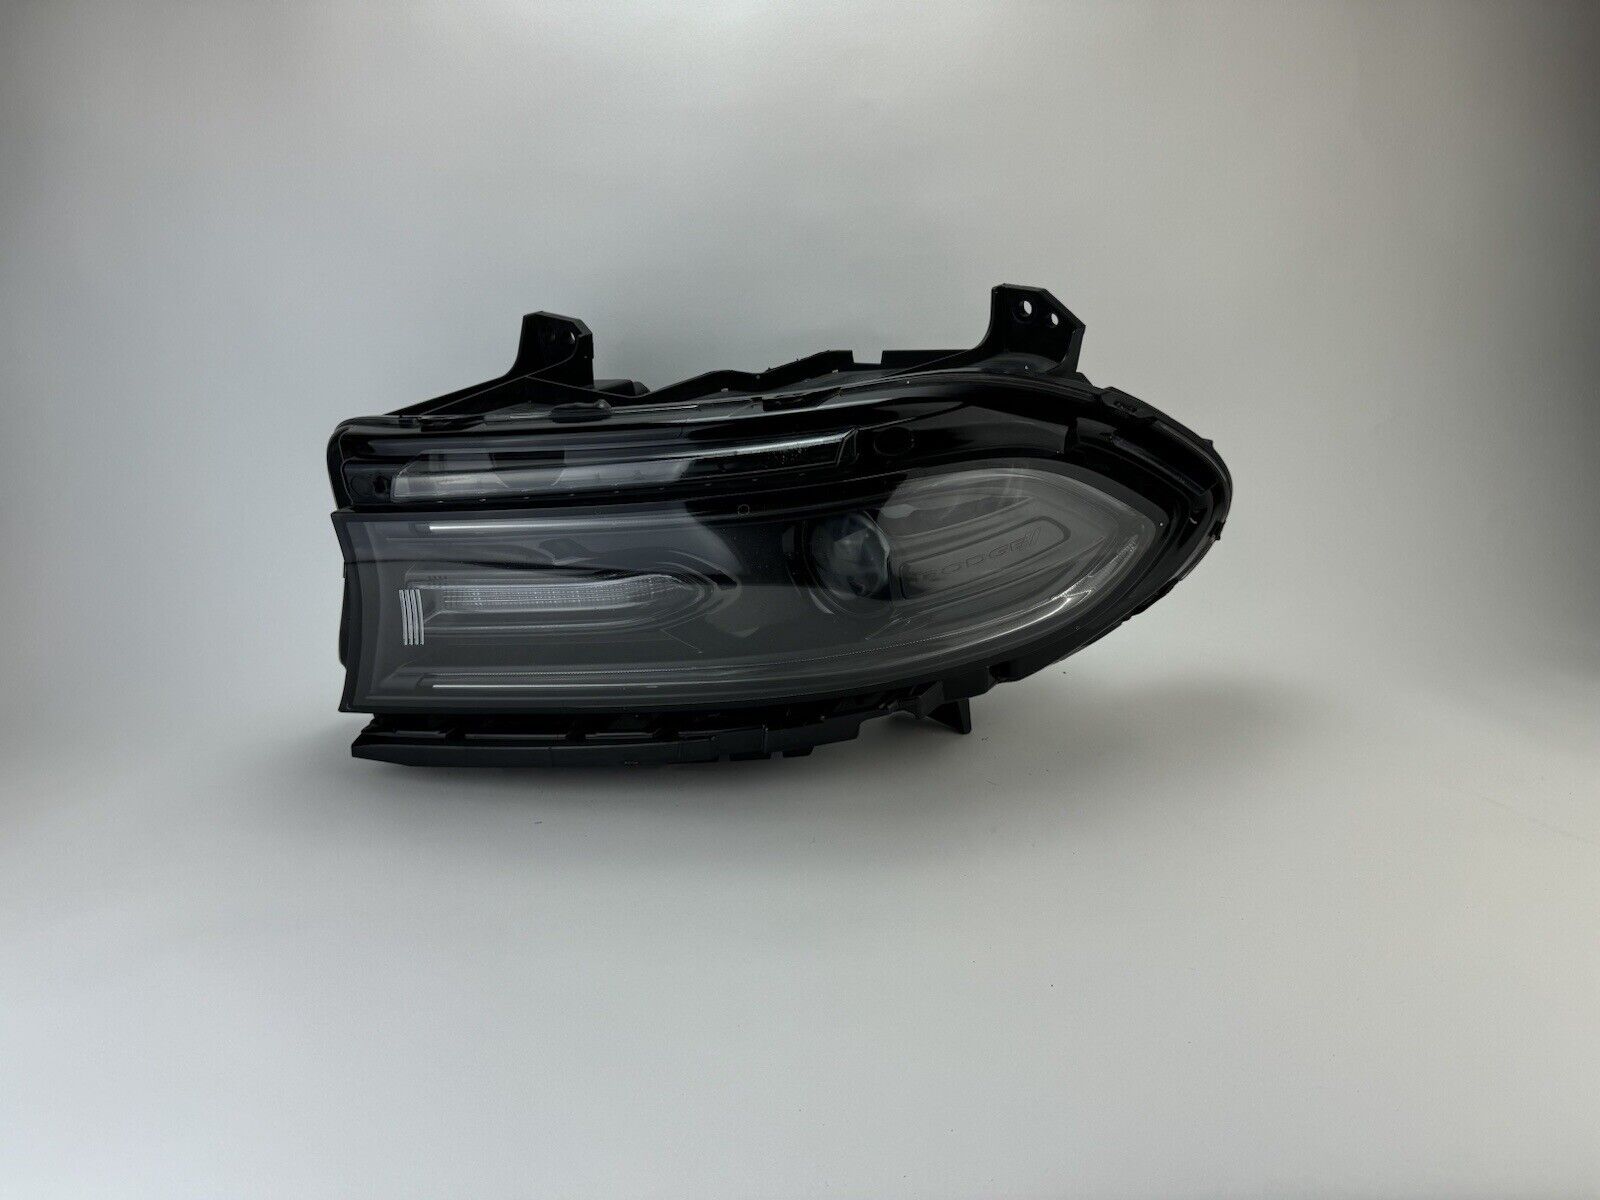 2015 2016 2017 2018 Dodge Charger Headlight LH Left Driver Side Xenon HID OEM